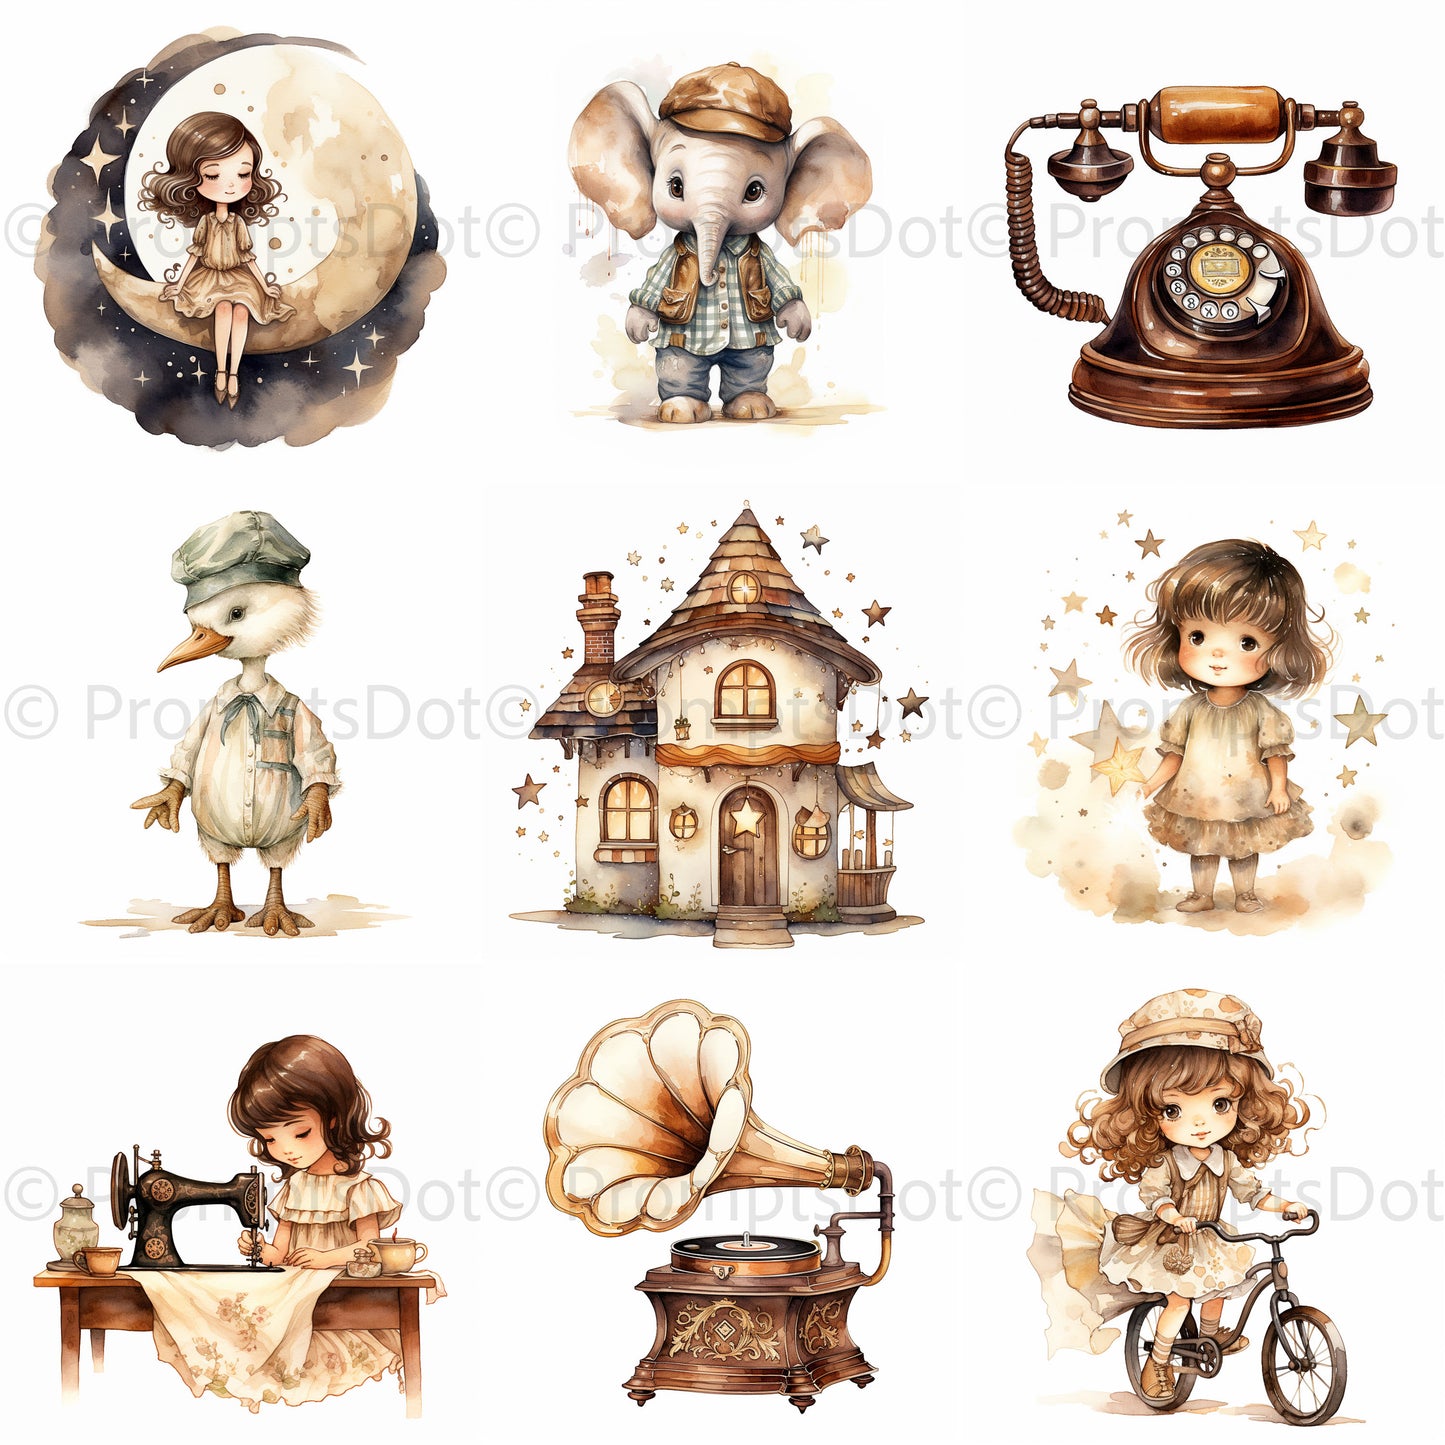 Vintage Watercolor Nursery Collections Digital Art and Midjourney Prompt Commercial Use